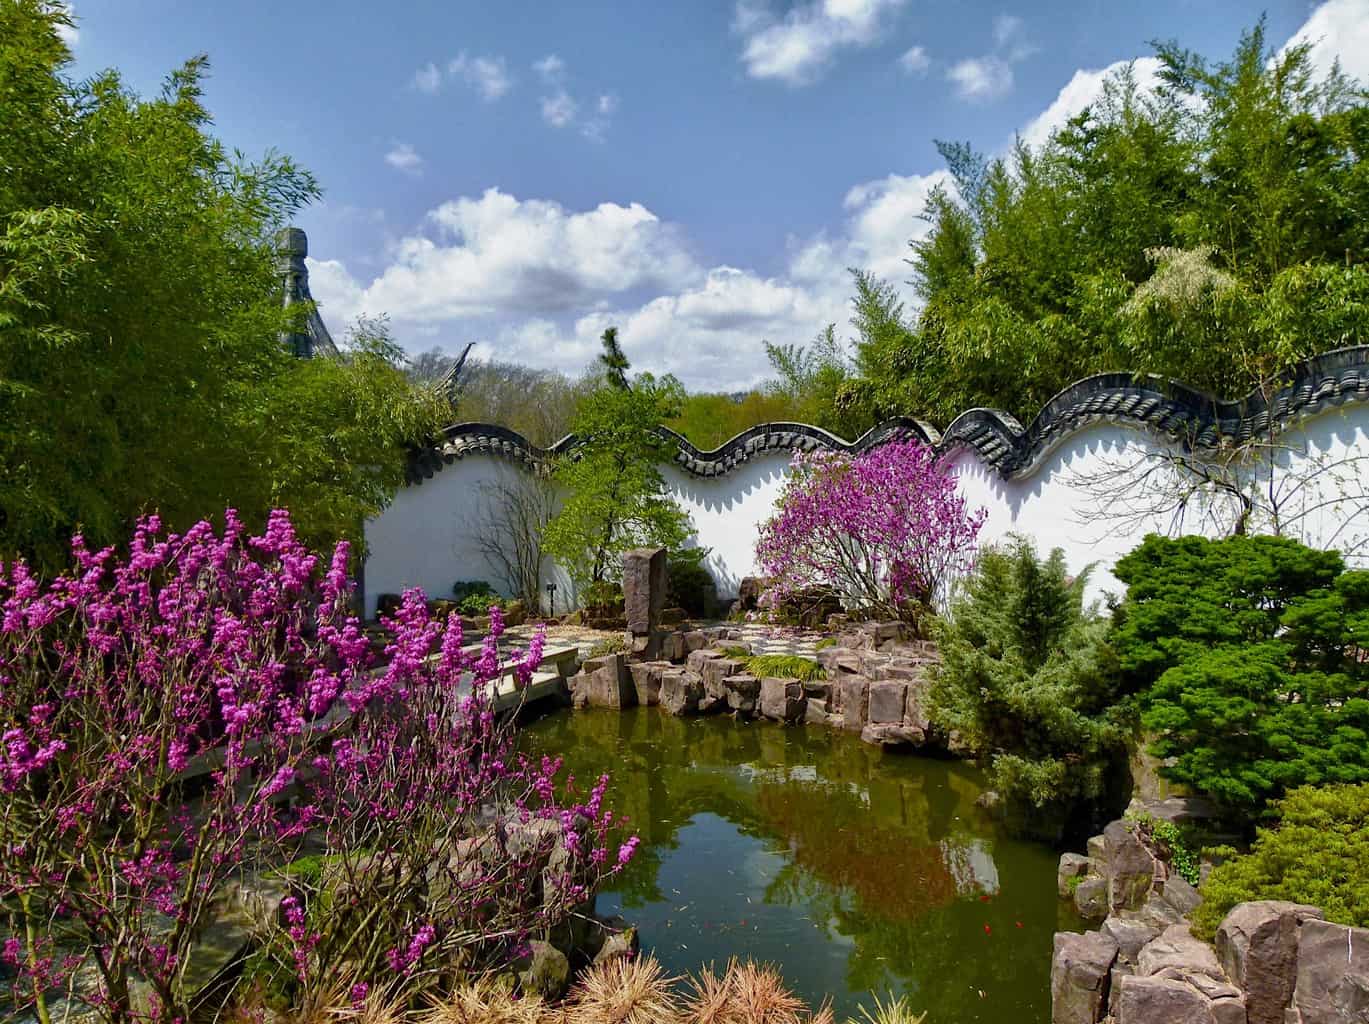 The quiet beauty of the Chinese Scholar's Garden in Staten Island, New York City.